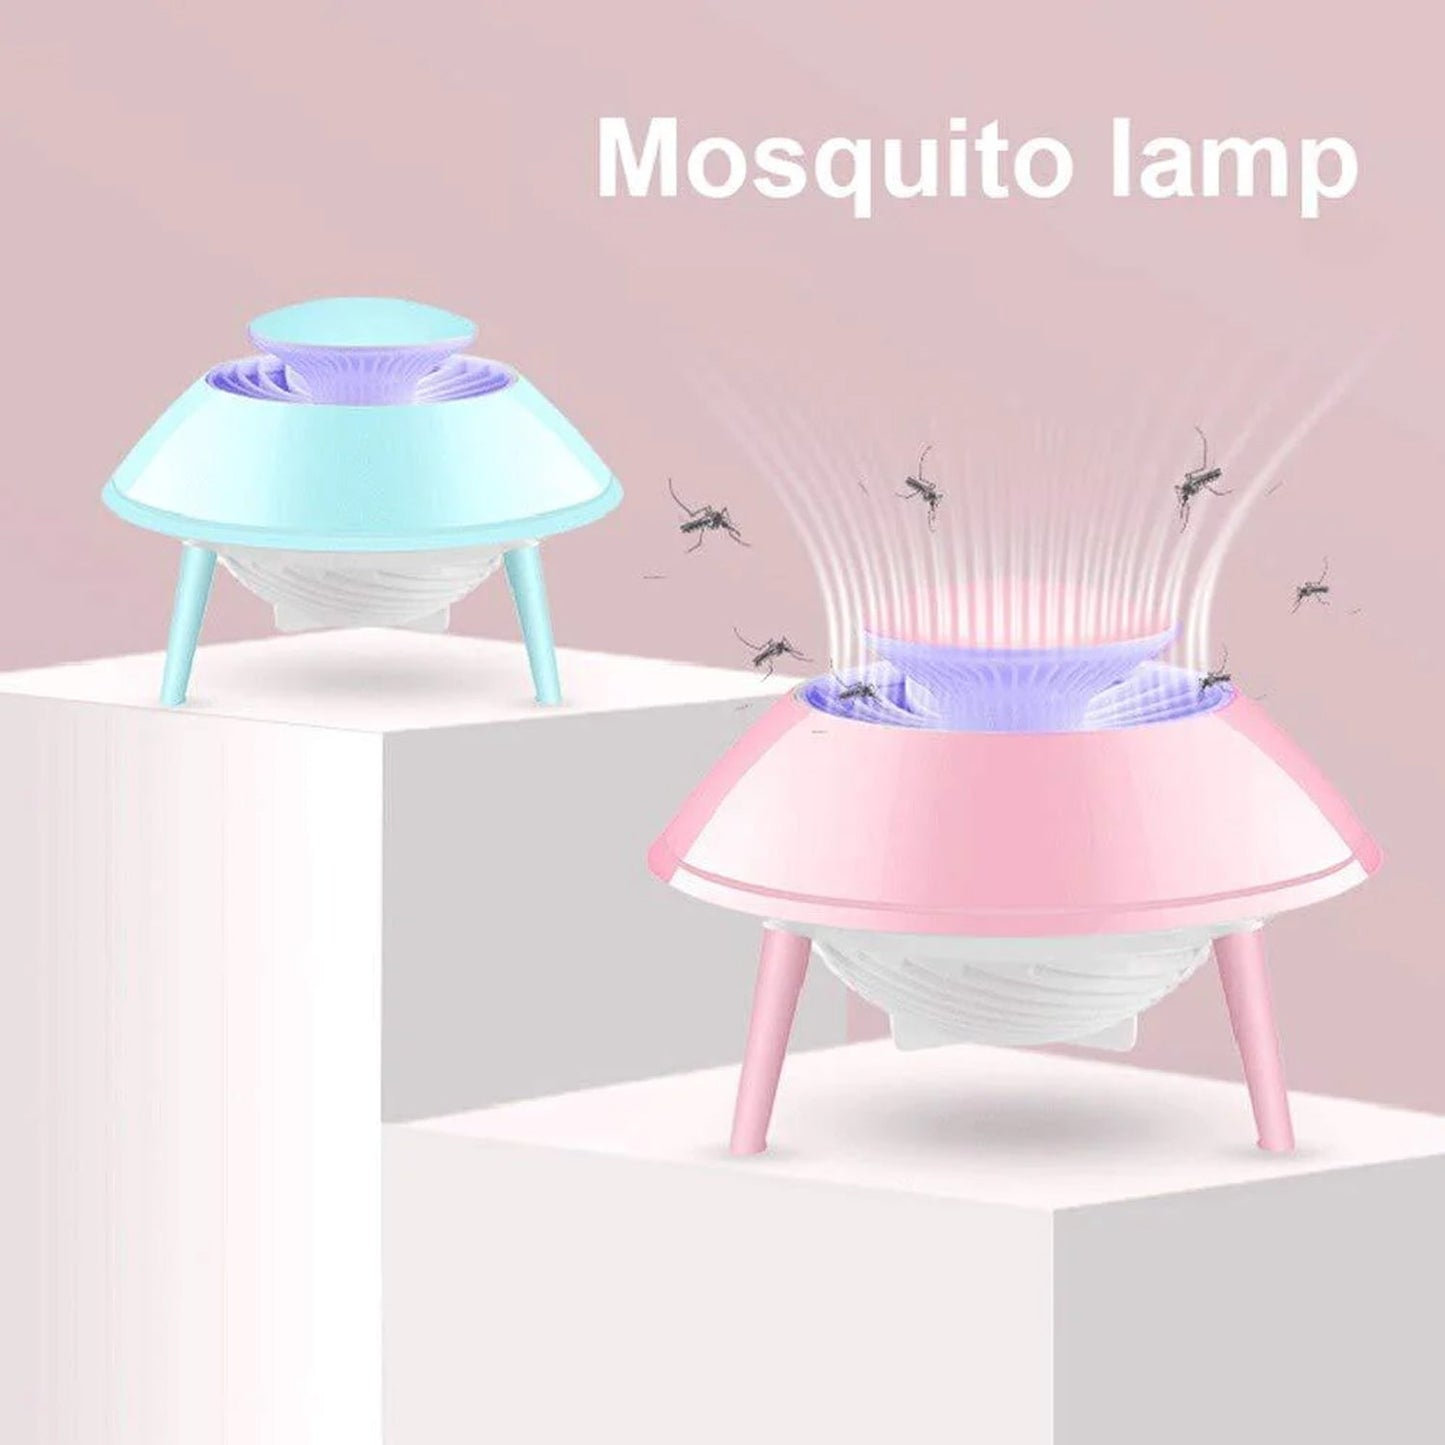 6465 Mosquito Trap Killer Space Ship Design lamp Flying saucer mosquito catcher suction Machine - SWASTIK CREATIONS The Trend Point SWASTIK CREATIONS The Trend Point